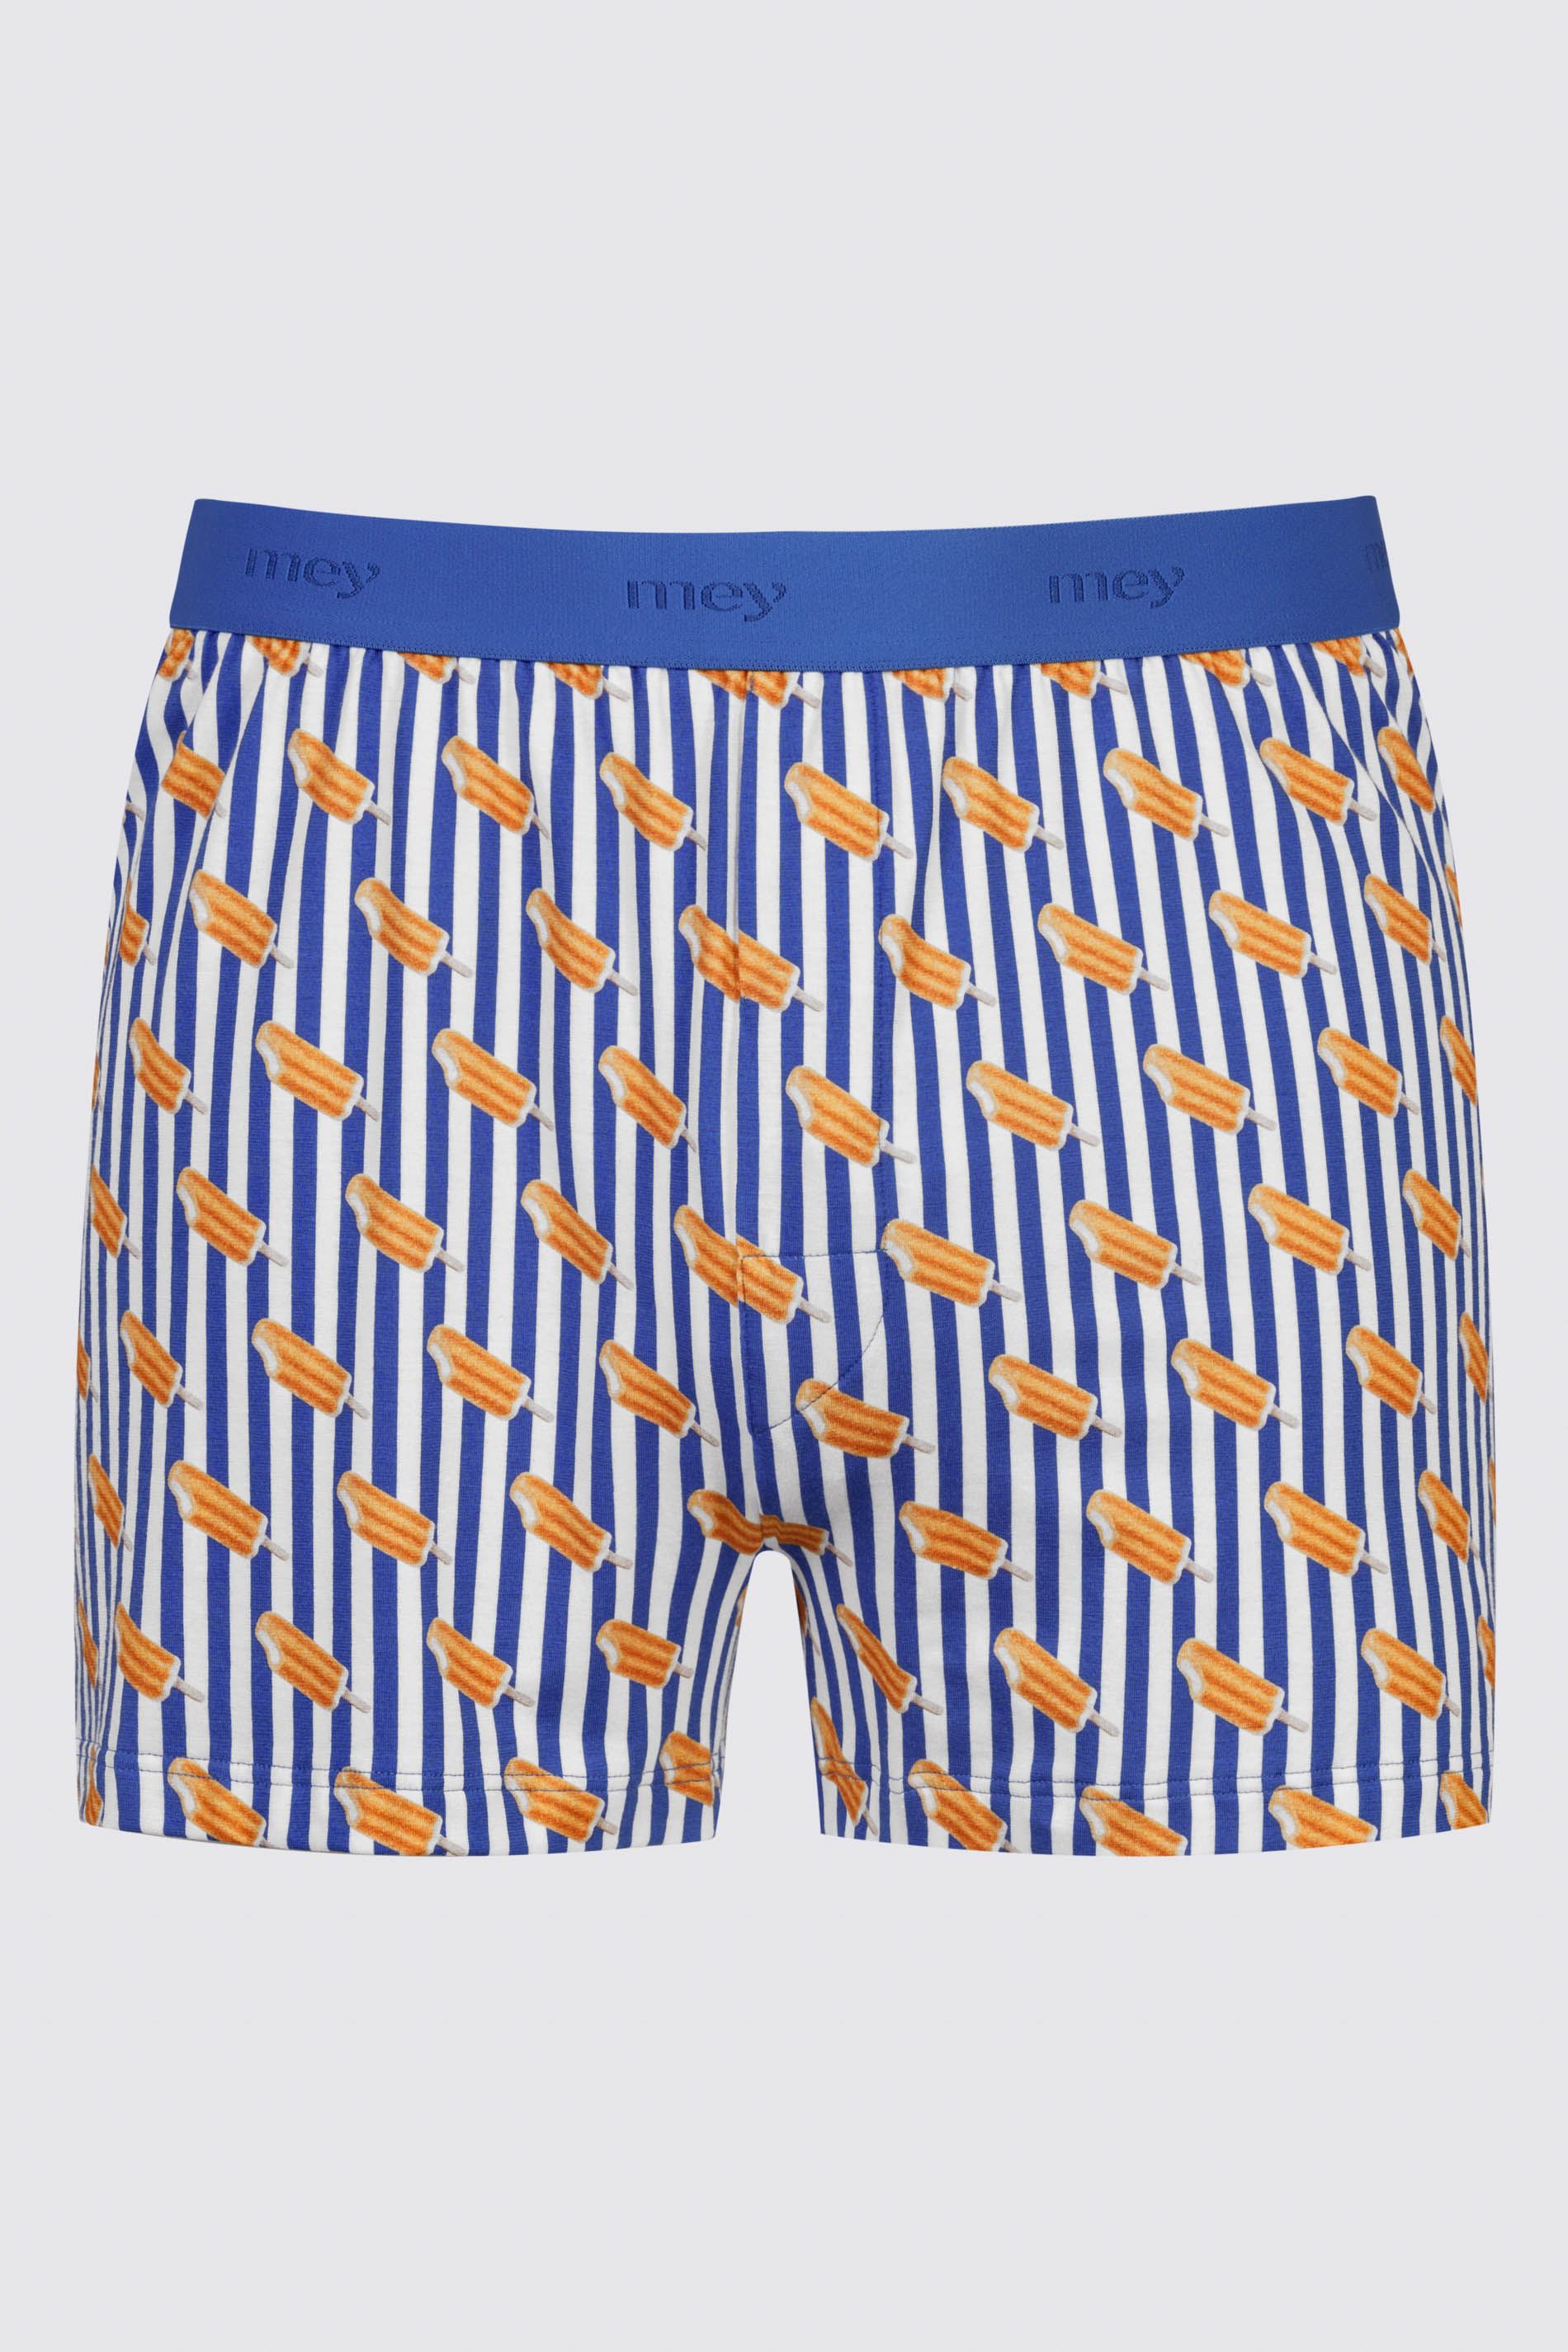 Boxer shorts Serie RE:THINK ICE Uitknippen | mey®